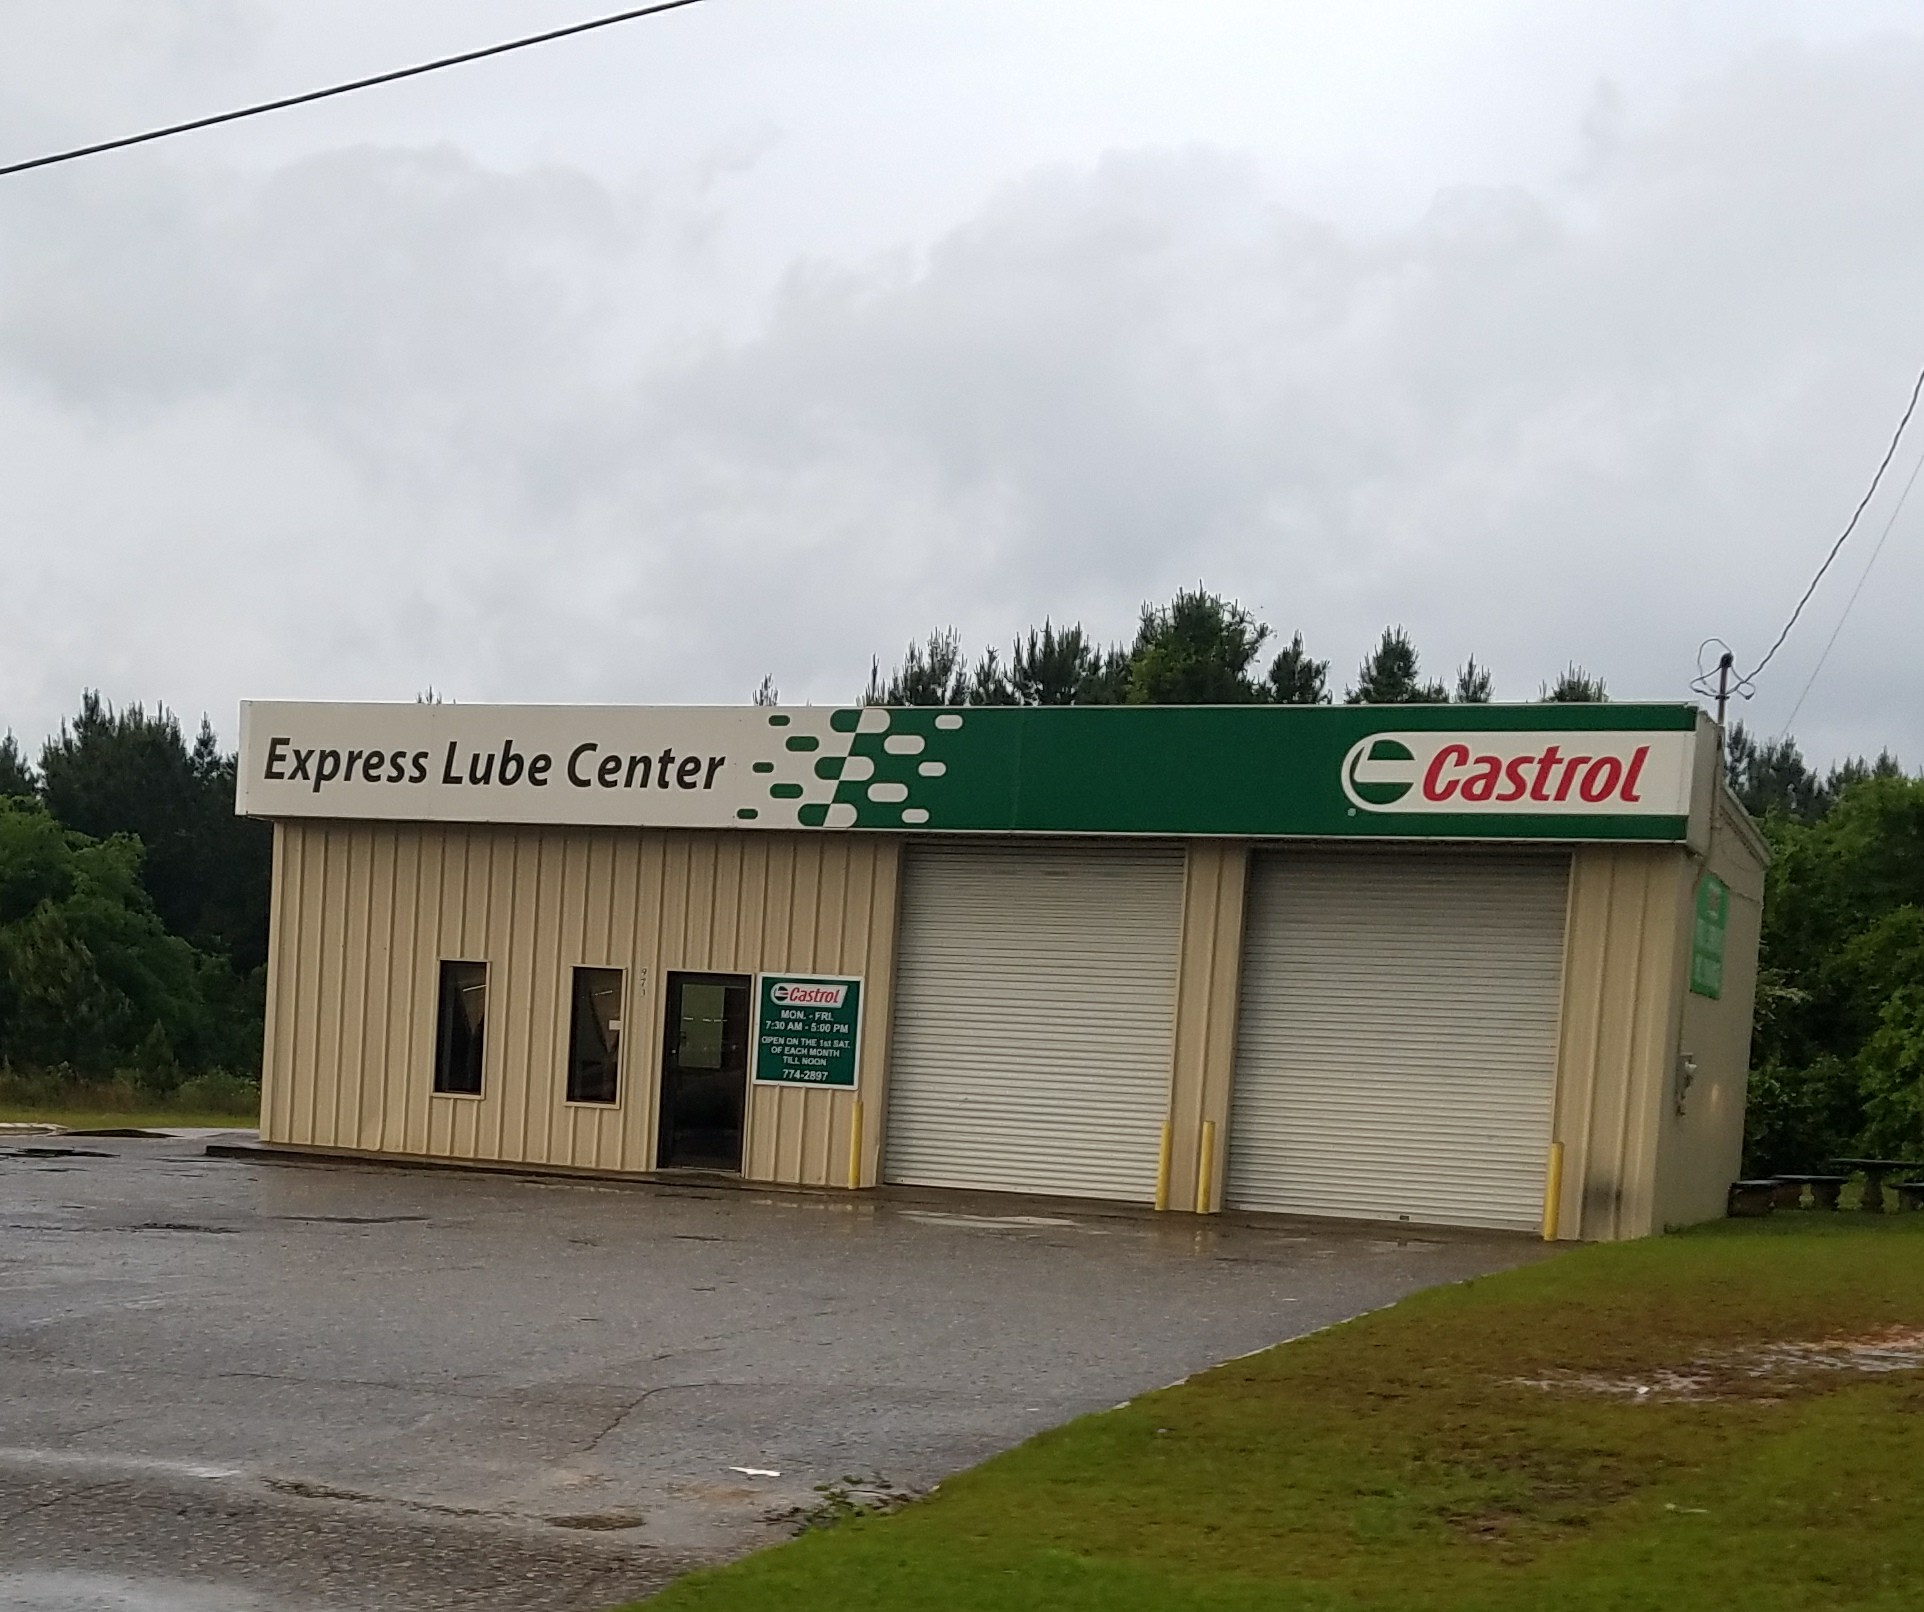 Express Lube Center